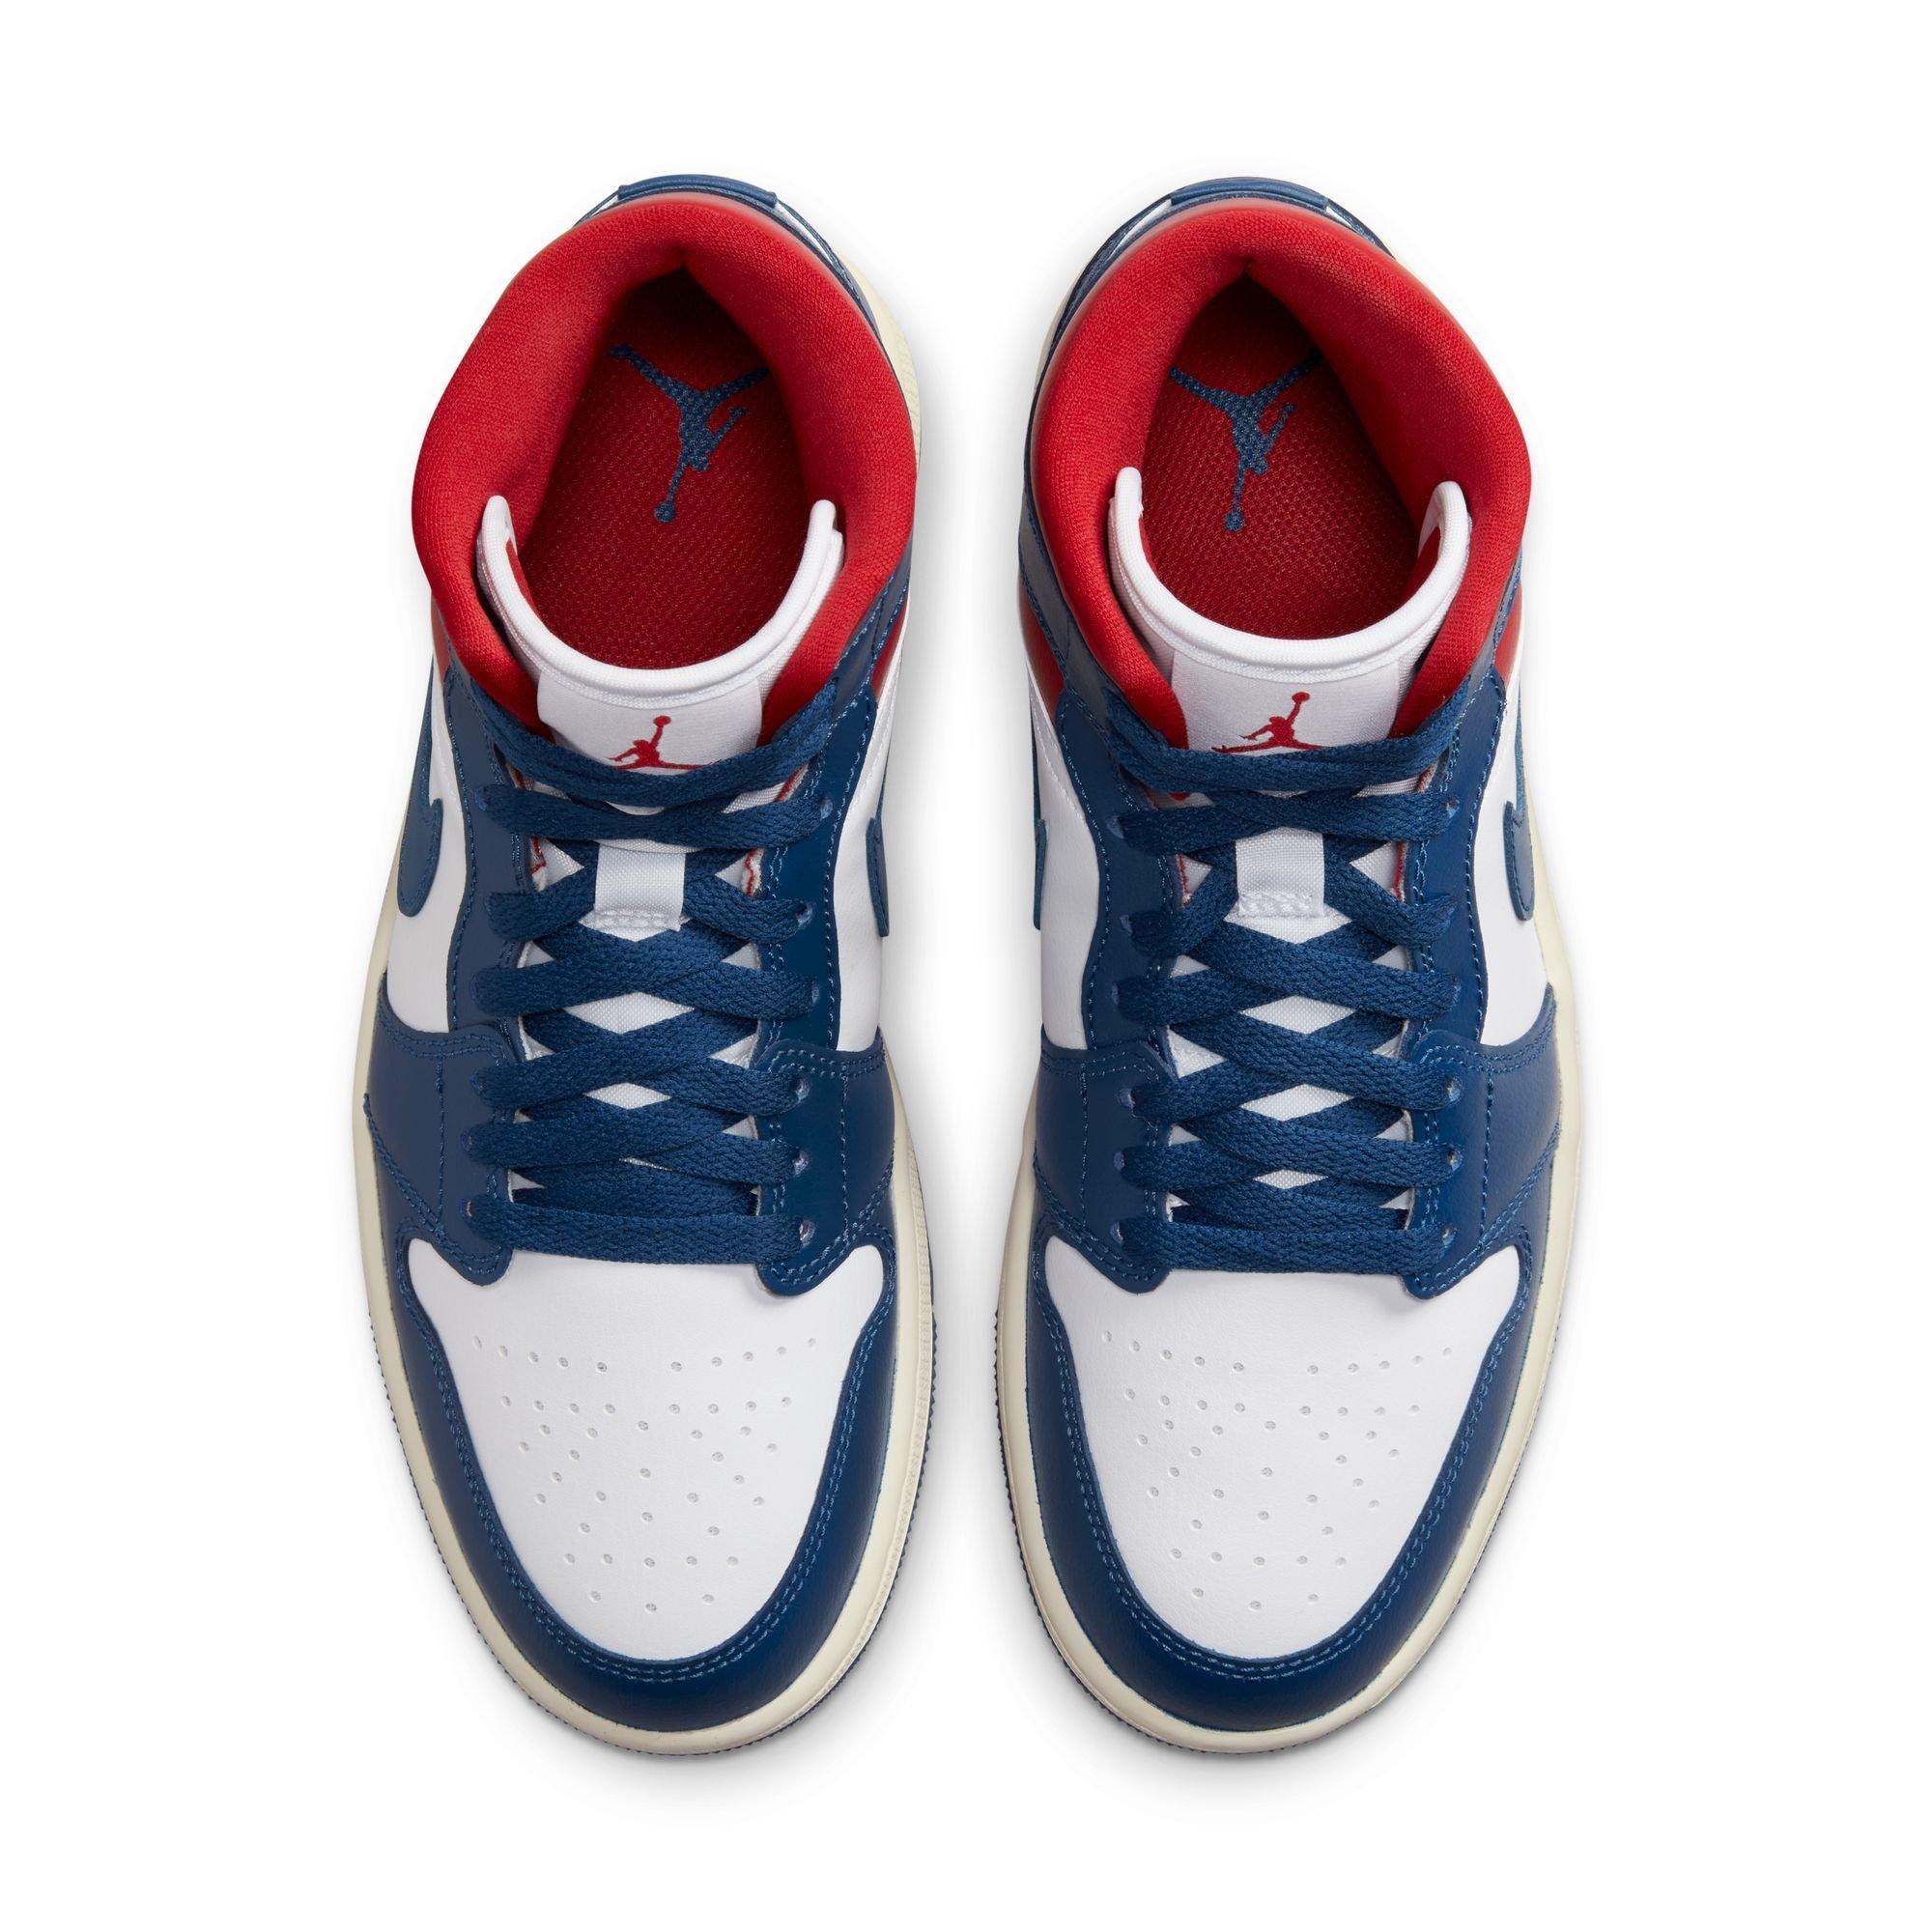 Air Jordan 1 Mid White French Blue Gym Red (W) Raffles and Release Date